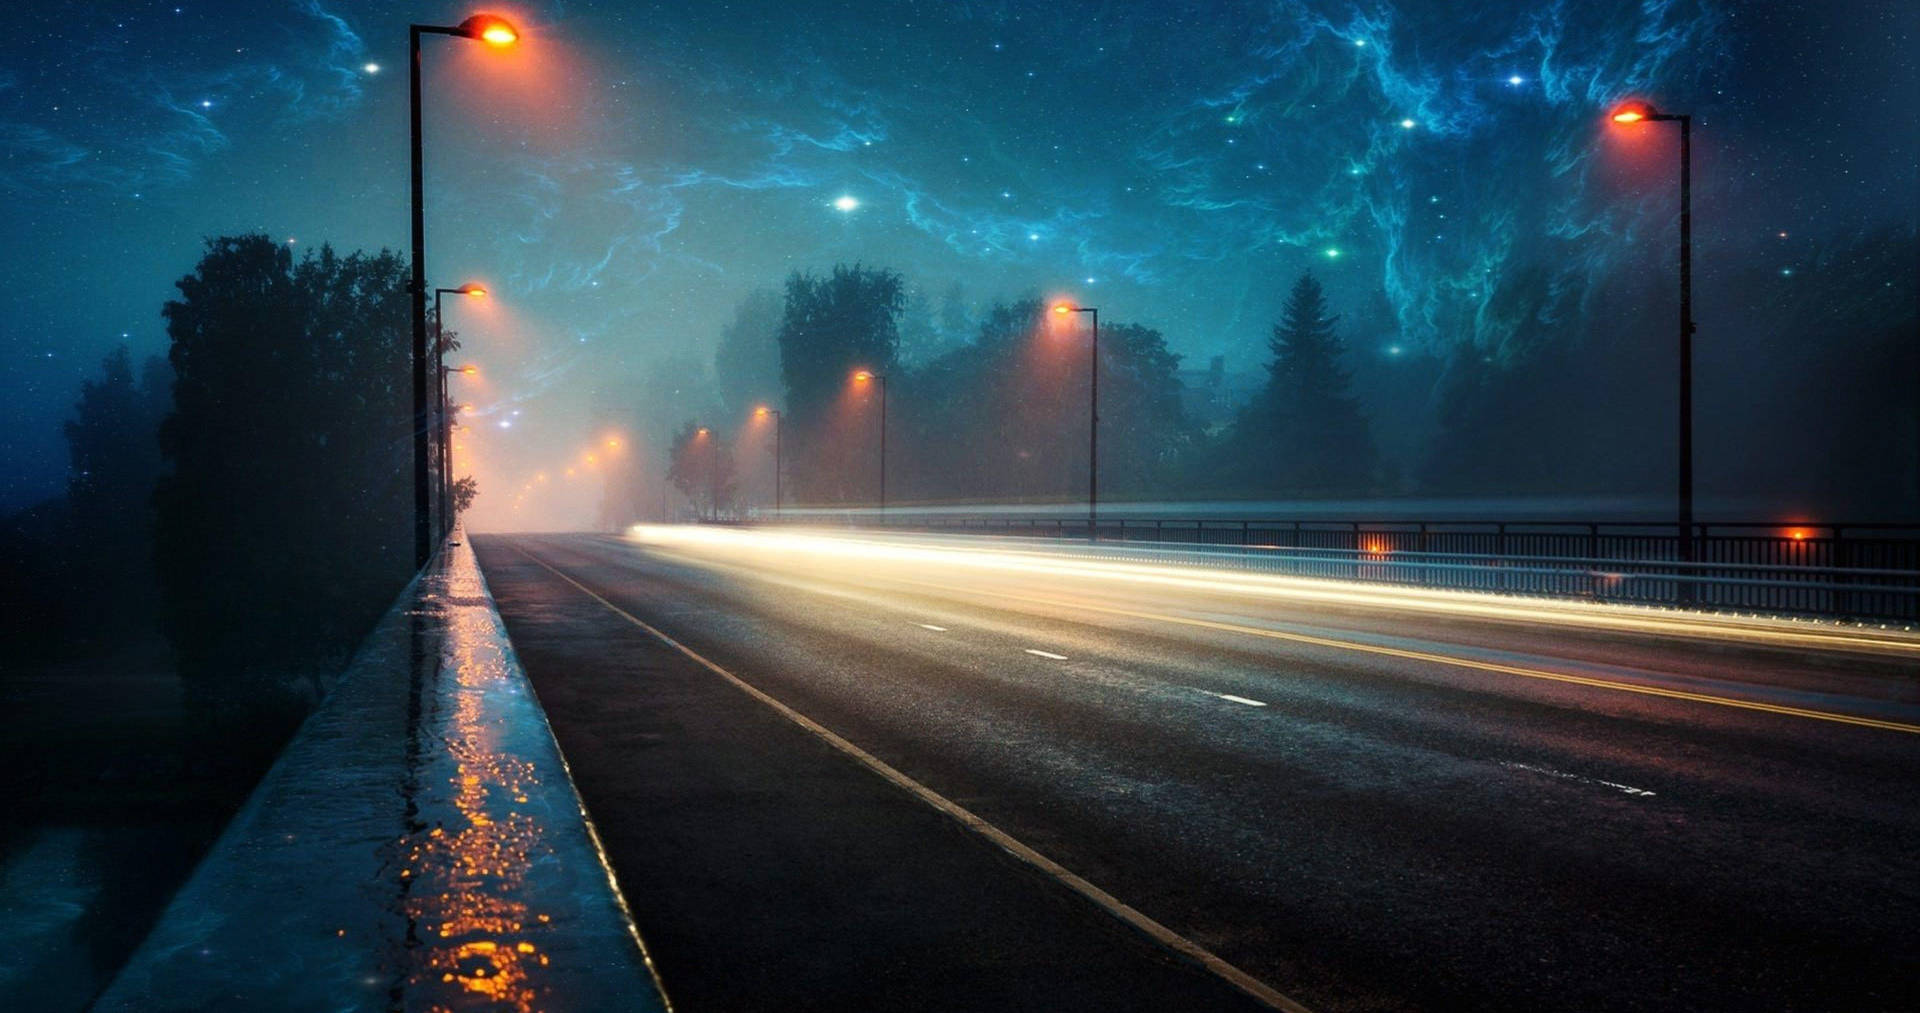 A Road With Lights And Stars In The Sky Wallpaper